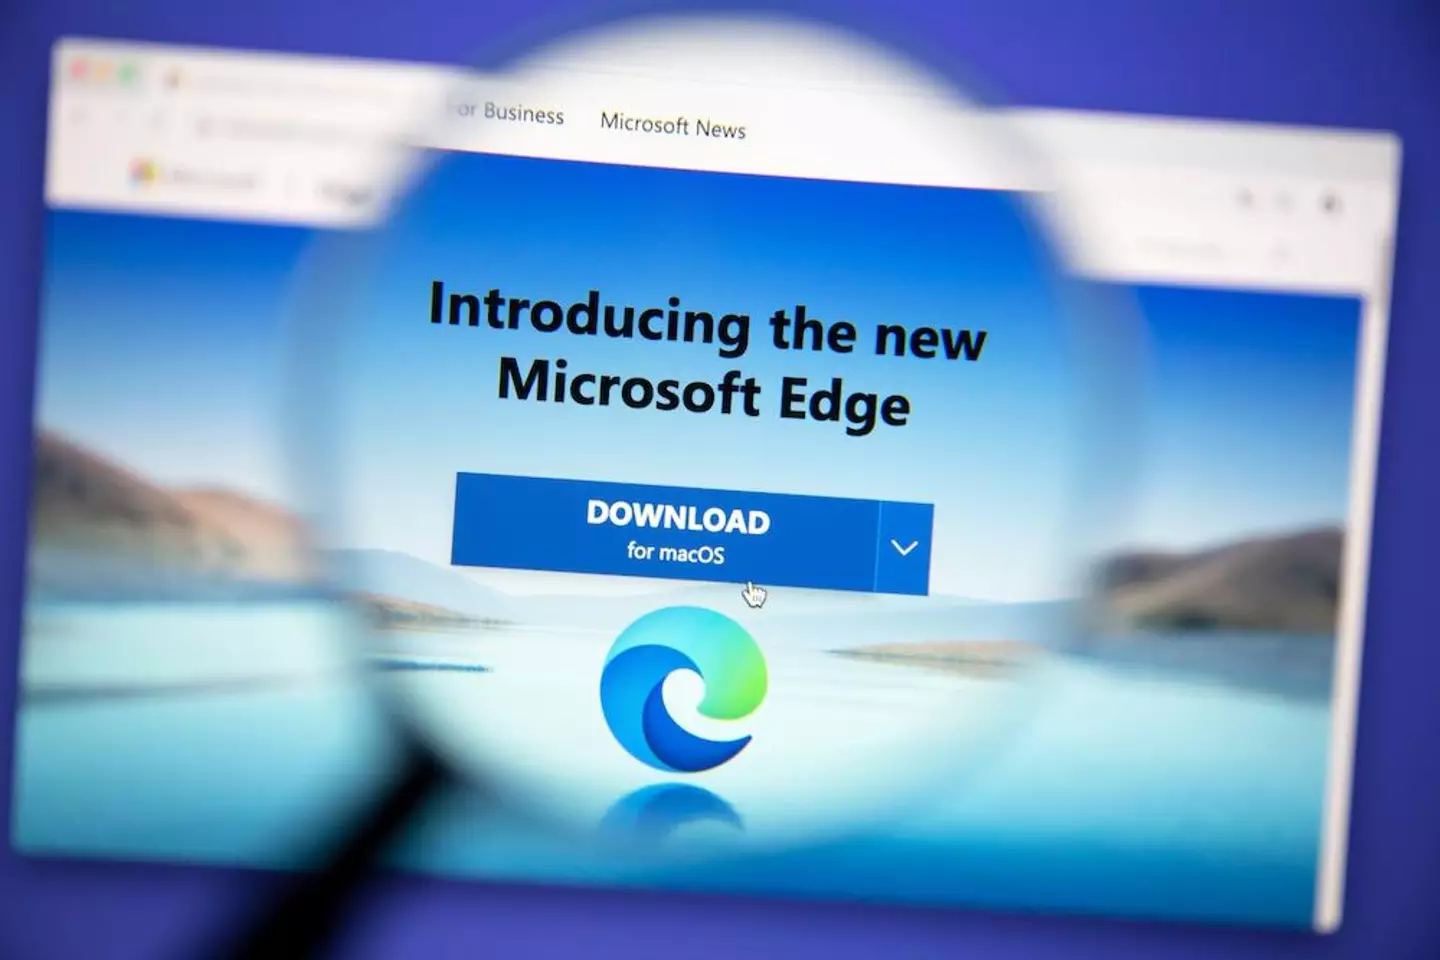 Microsoft Edge is the company's latest web browser.